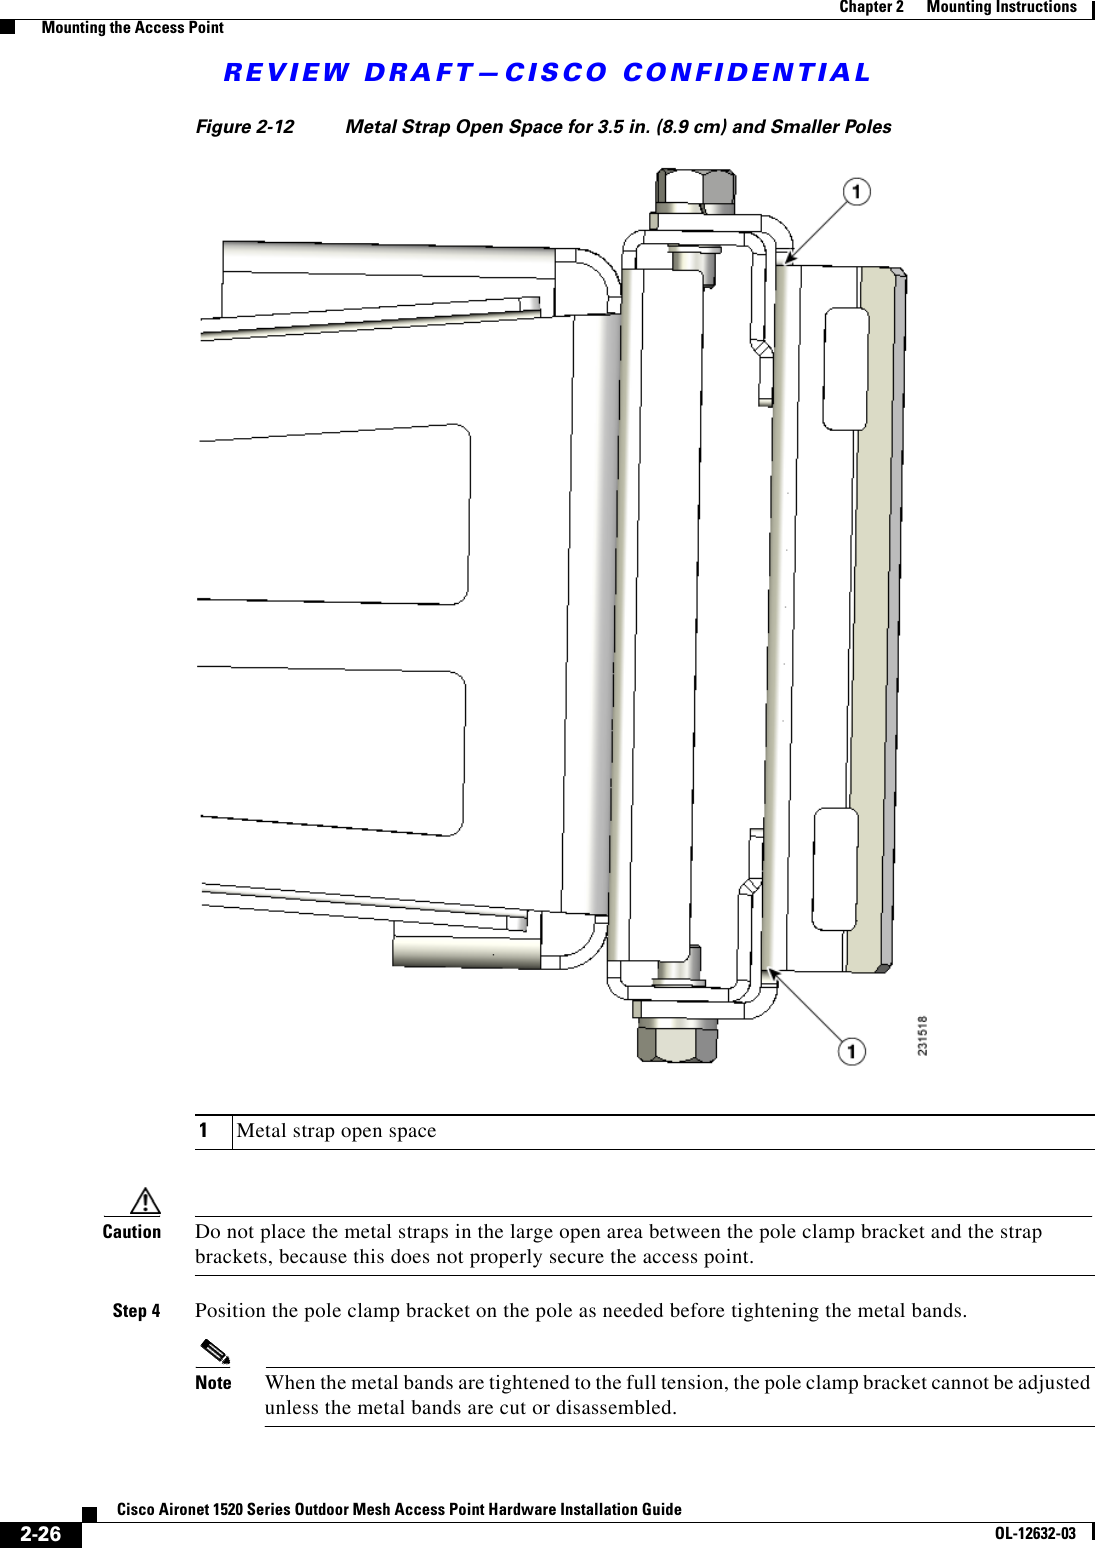 REVIEW DRAFT—CISCO CONFIDENTIAL2-26Cisco Aironet 1520 Series Outdoor Mesh Access Point Hardware Installation GuideOL-12632-03Chapter 2      Mounting Instructions  Mounting the Access PointFigure 2-12 Metal Strap Open Space for 3.5 in. (8.9 cm) and Smaller Poles Caution Do not place the metal straps in the large open area between the pole clamp bracket and the strap brackets, because this does not properly secure the access point.Step 4 Position the pole clamp bracket on the pole as needed before tightening the metal bands.Note When the metal bands are tightened to the full tension, the pole clamp bracket cannot be adjusted unless the metal bands are cut or disassembled.1Metal strap open space